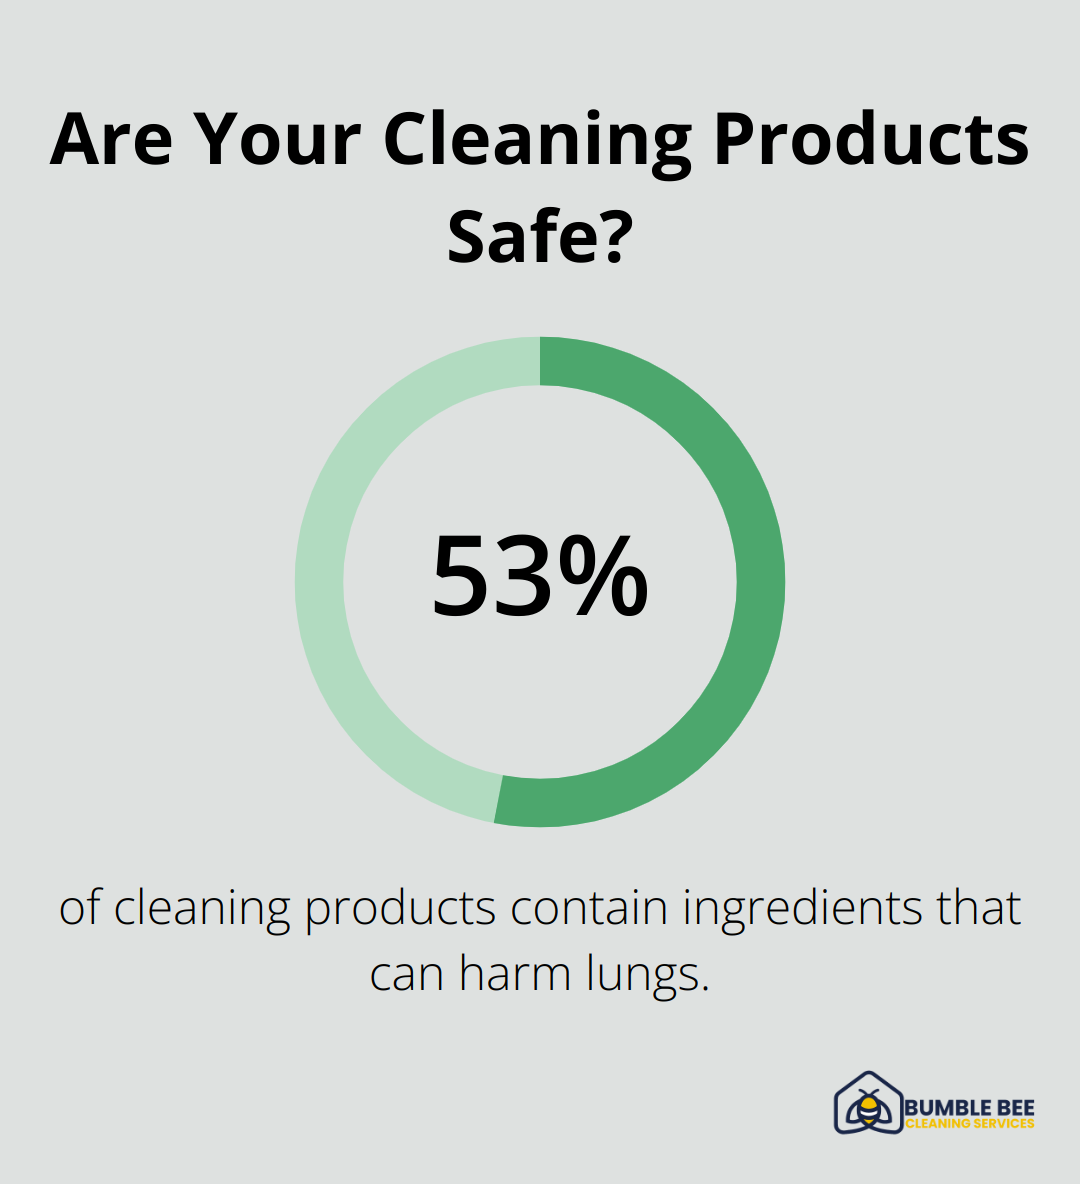 Are Your Cleaning Products Safe?